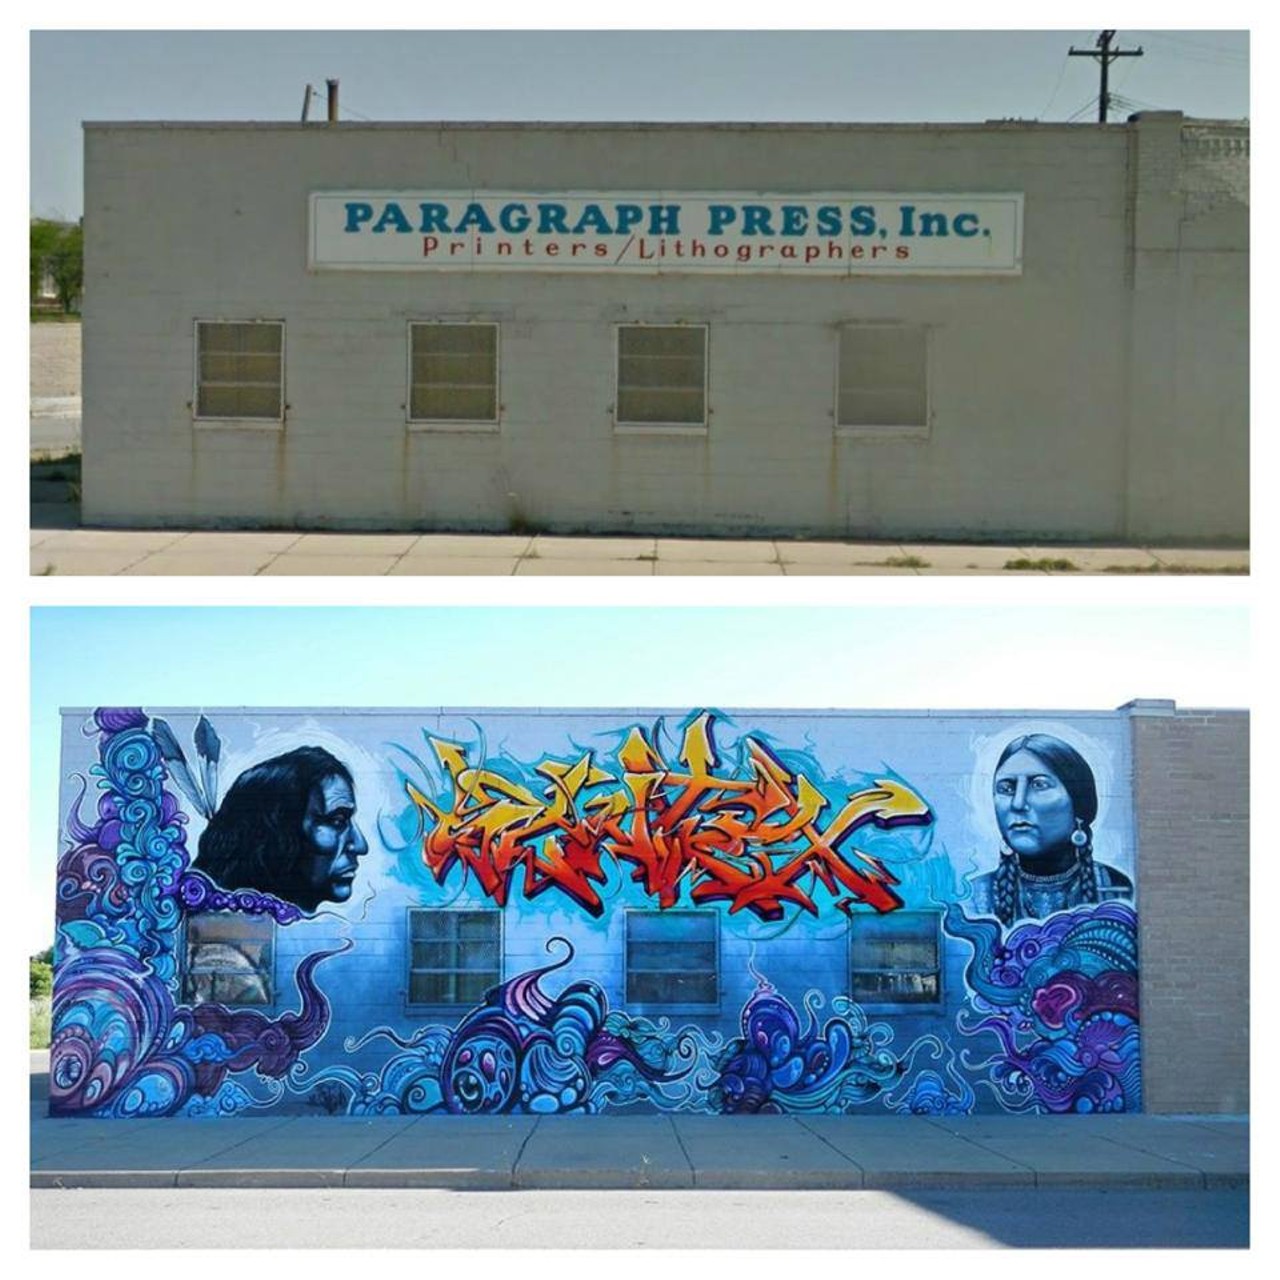 10 Amazing Before and After Graffiti Murals